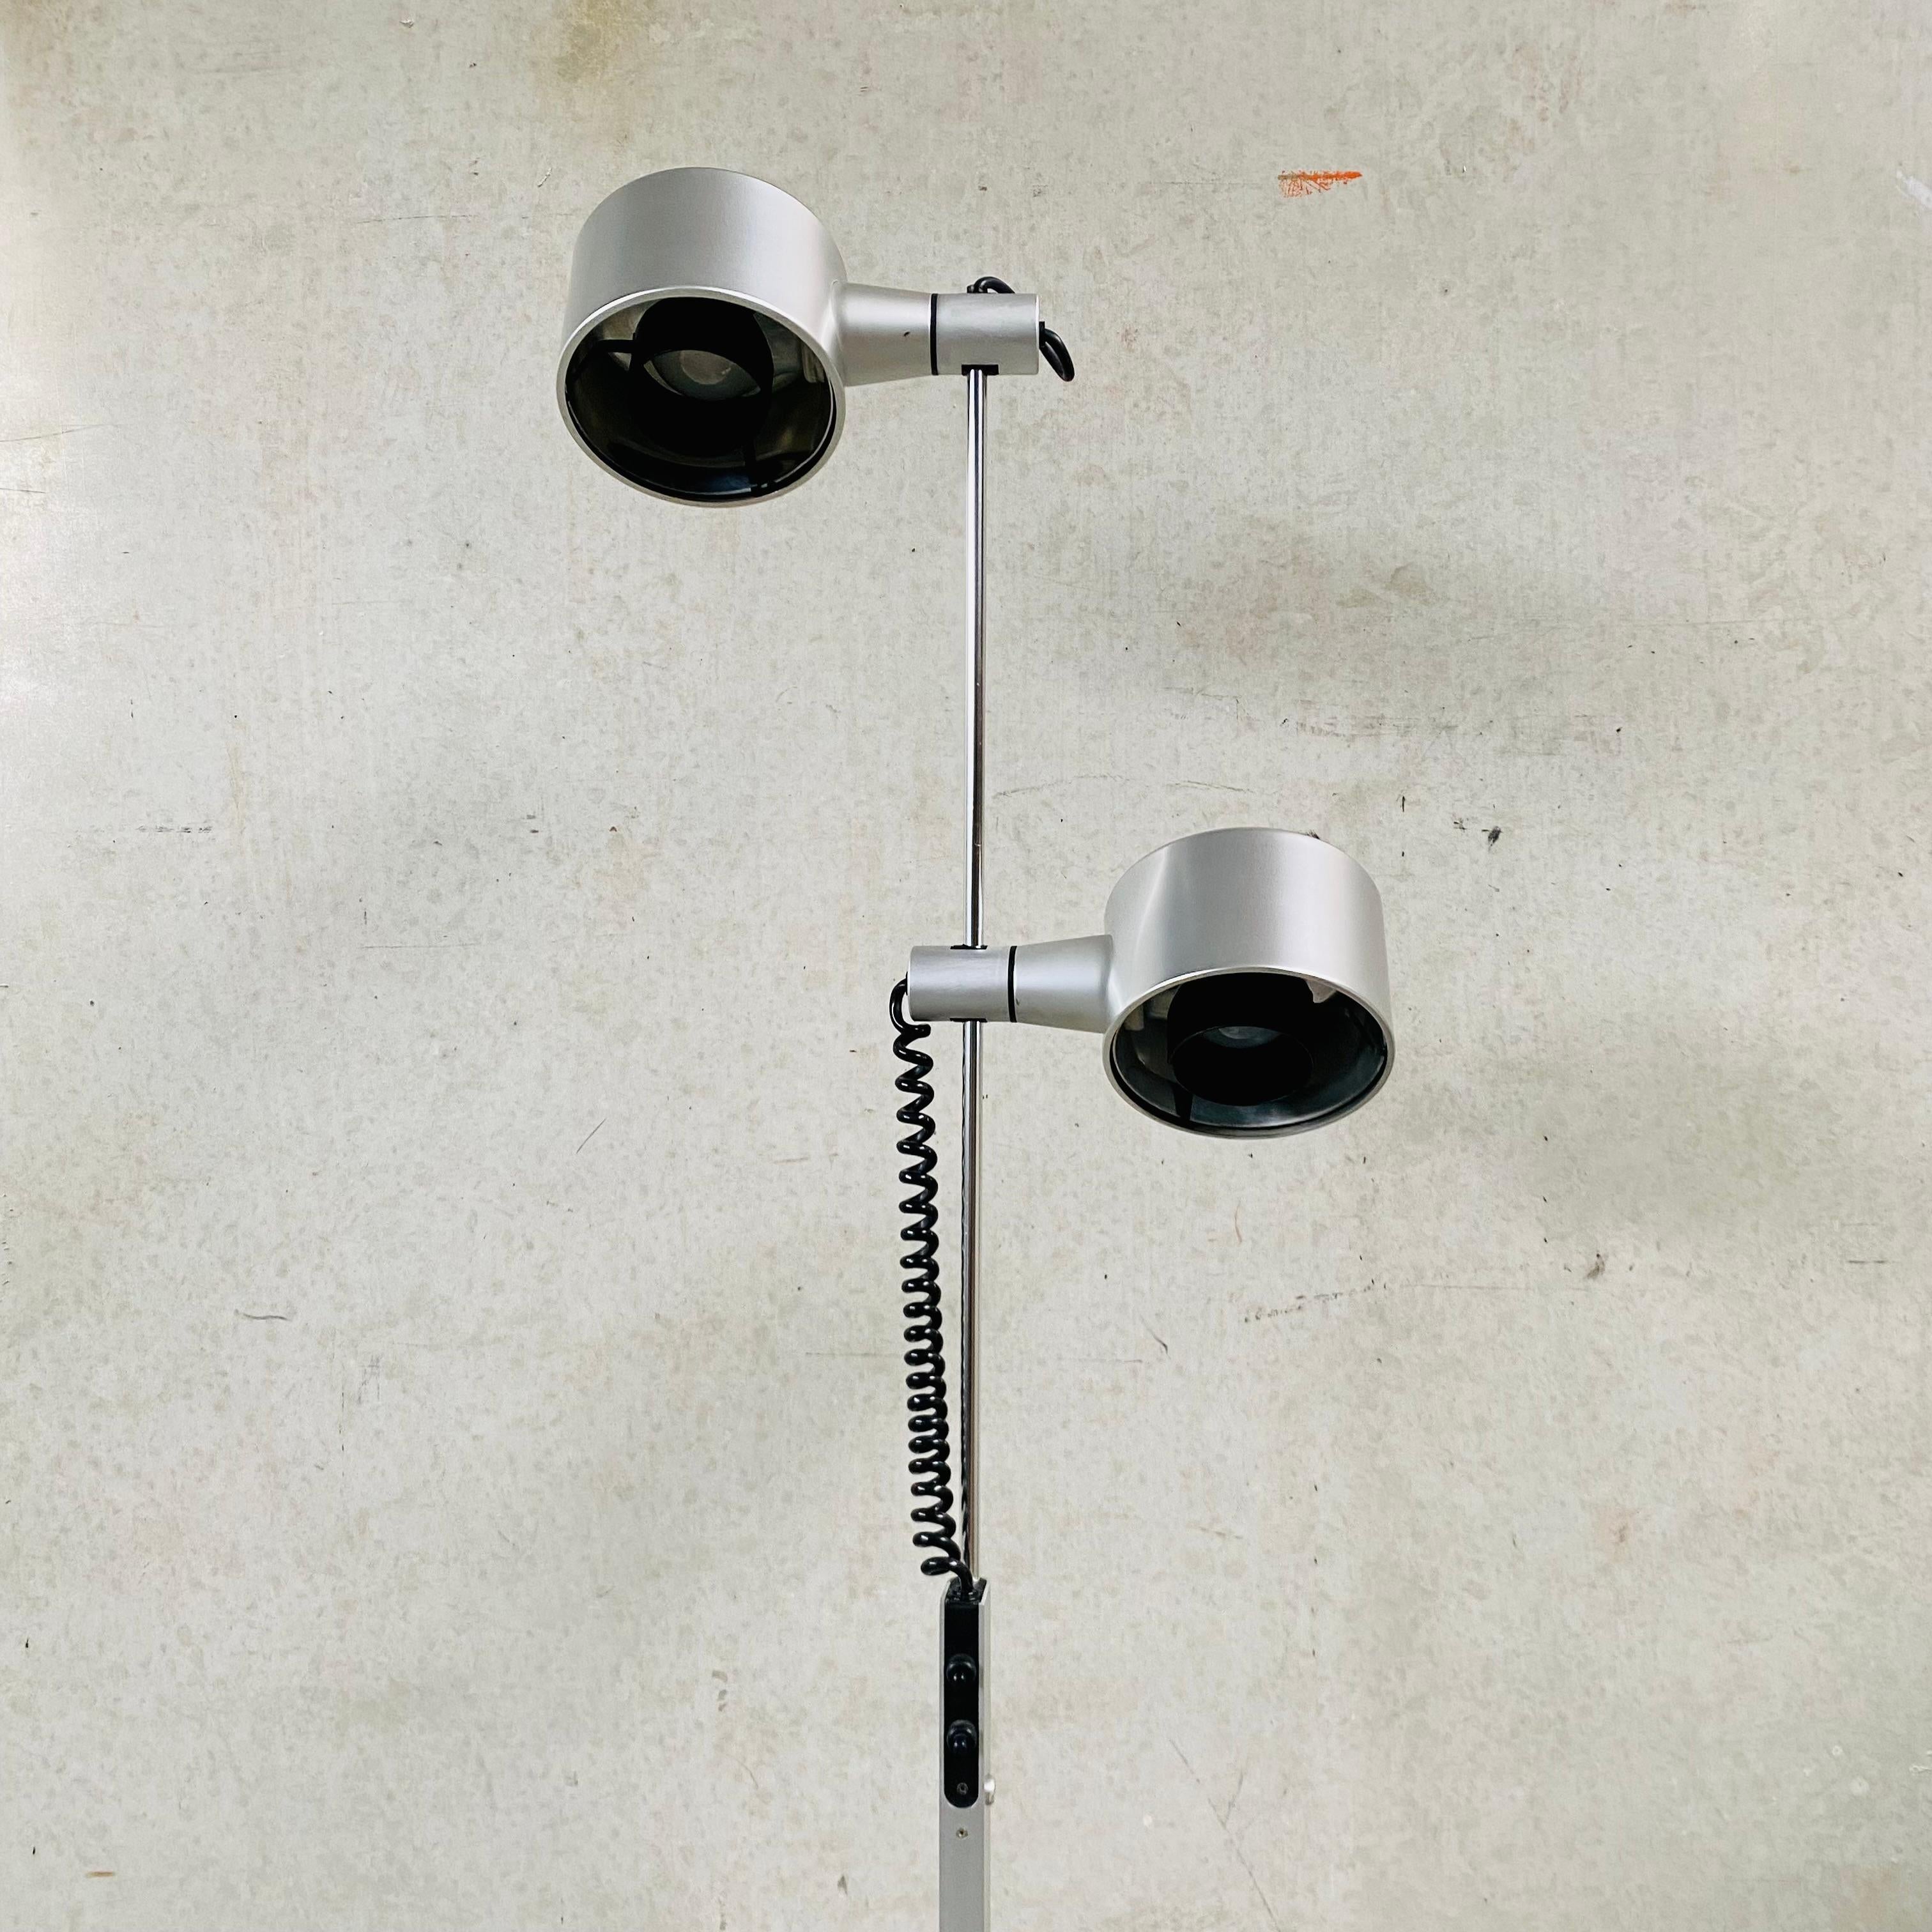 QC Twin Spotlicht Floor Lamp by Ronald Homes for Conelicht Limited, UK, 1970s For Sale 7